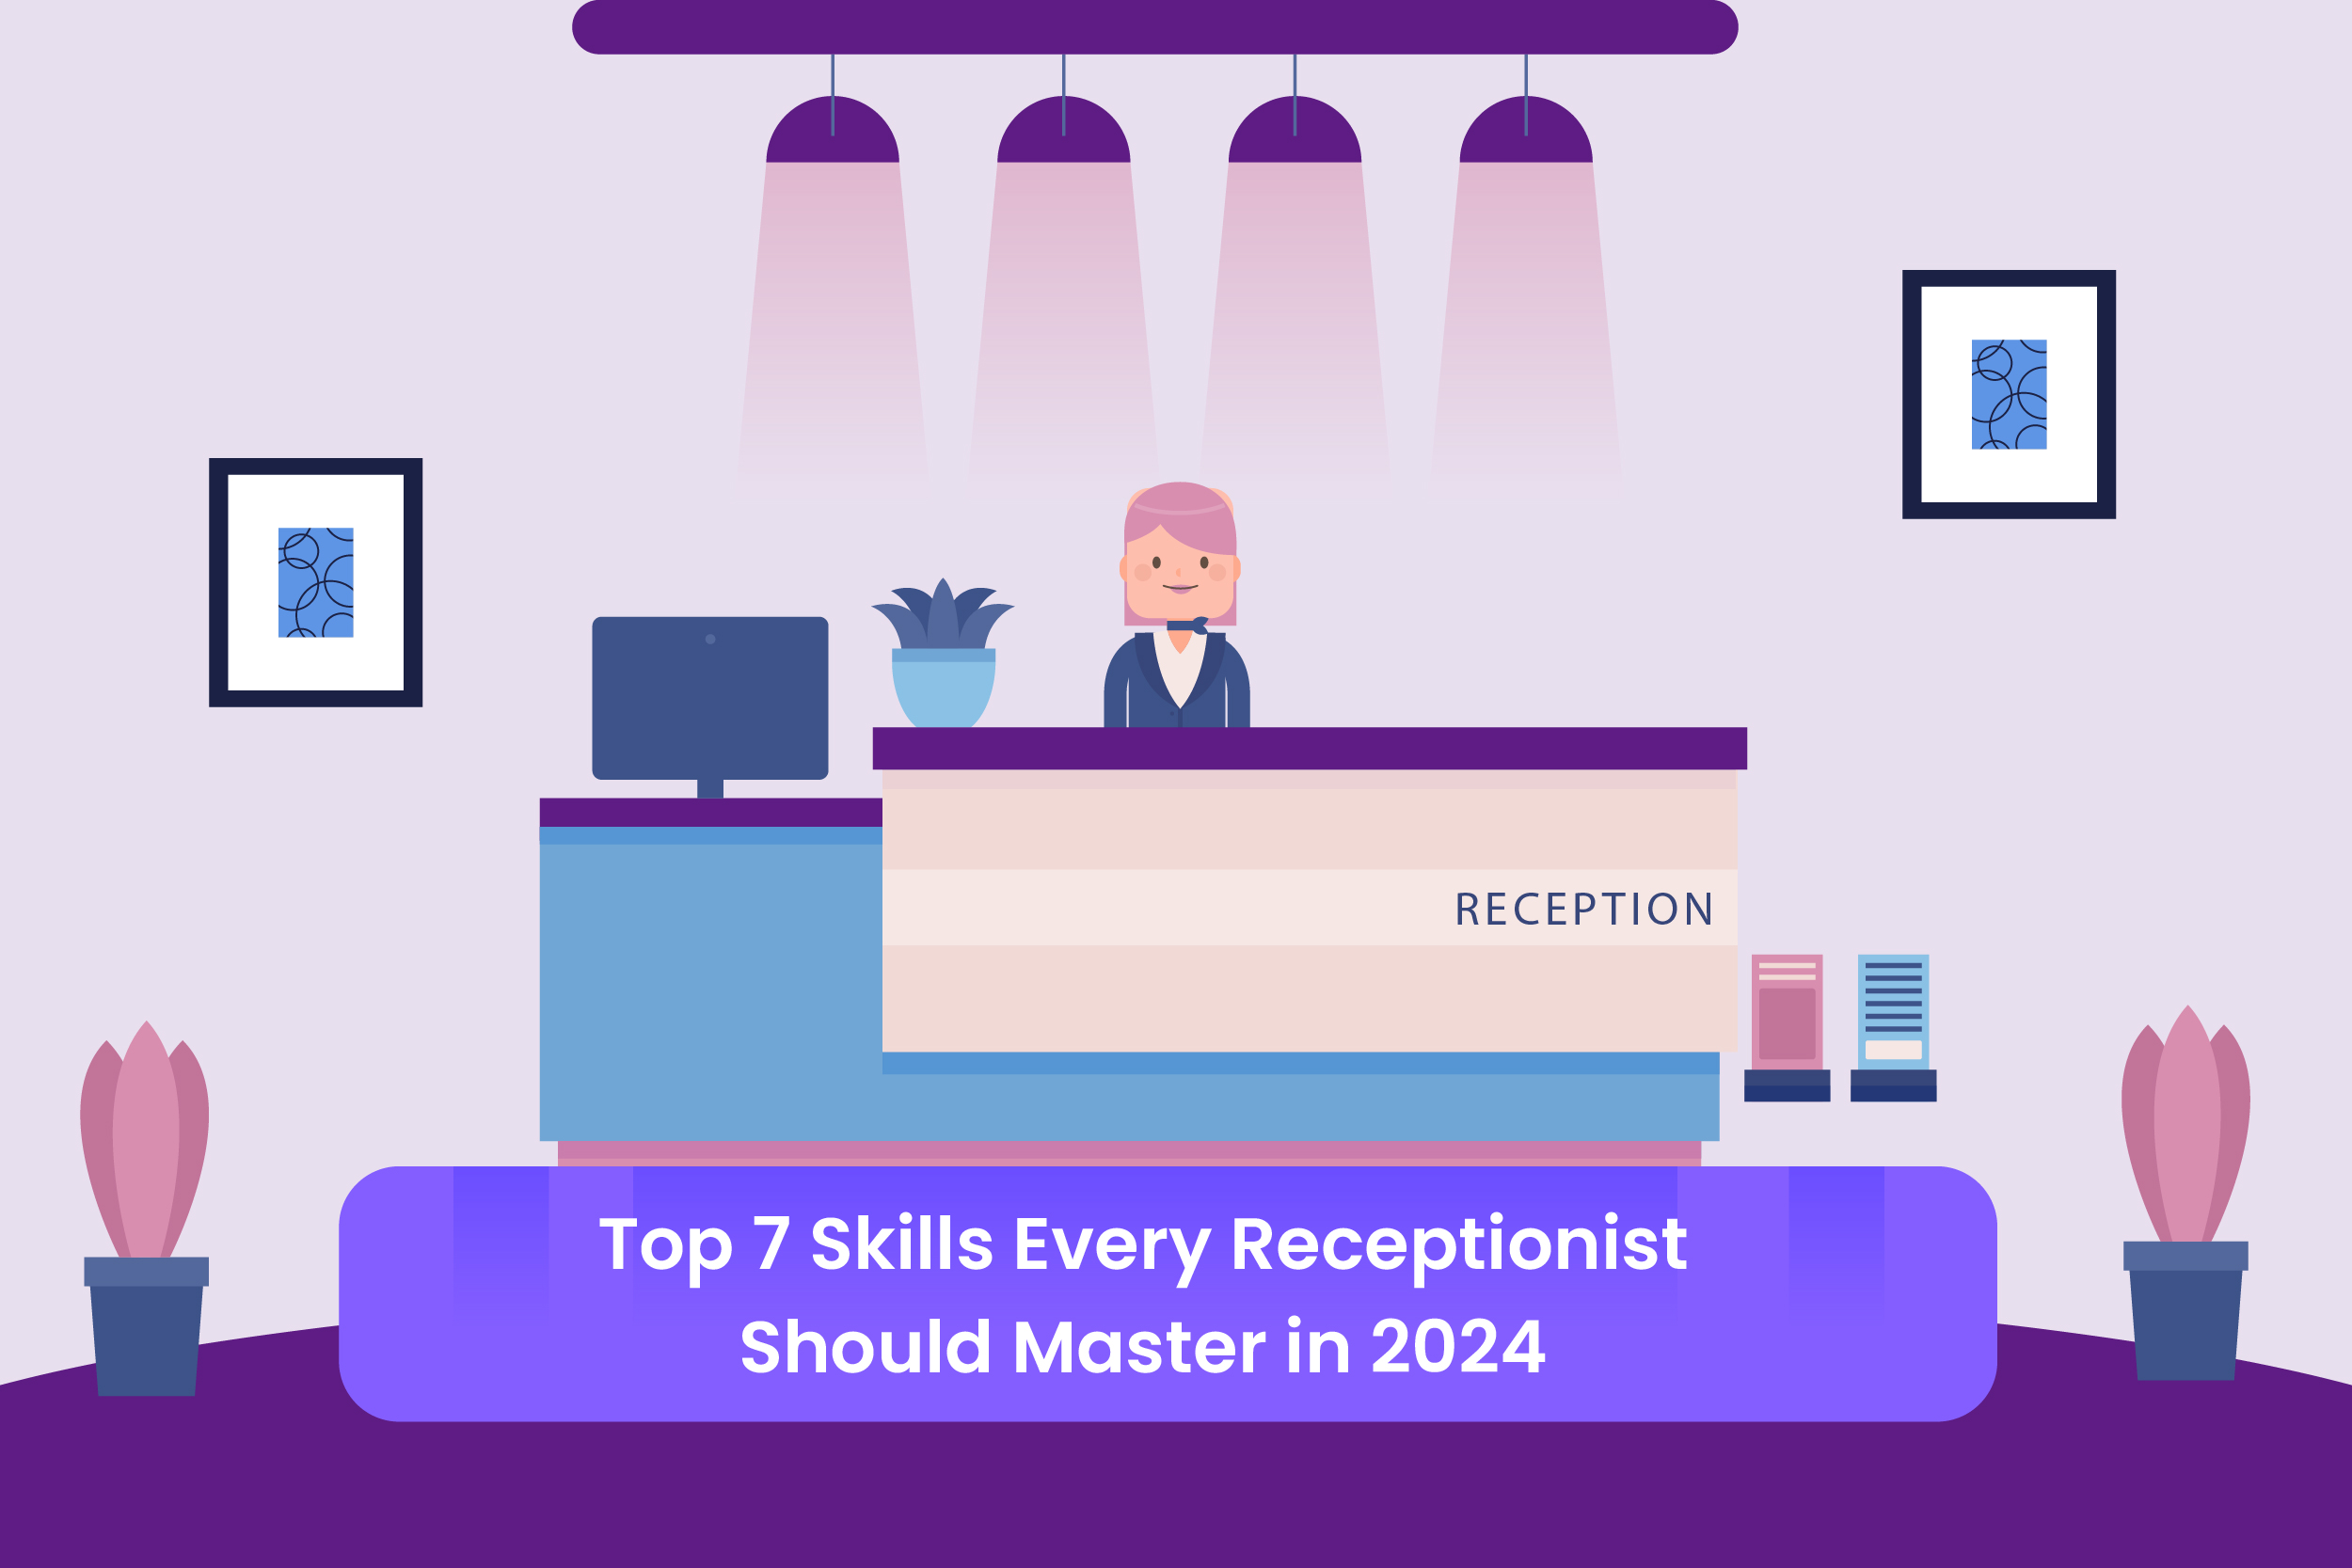 The Top 7 Skills Every Receptionist Should Master in 2024